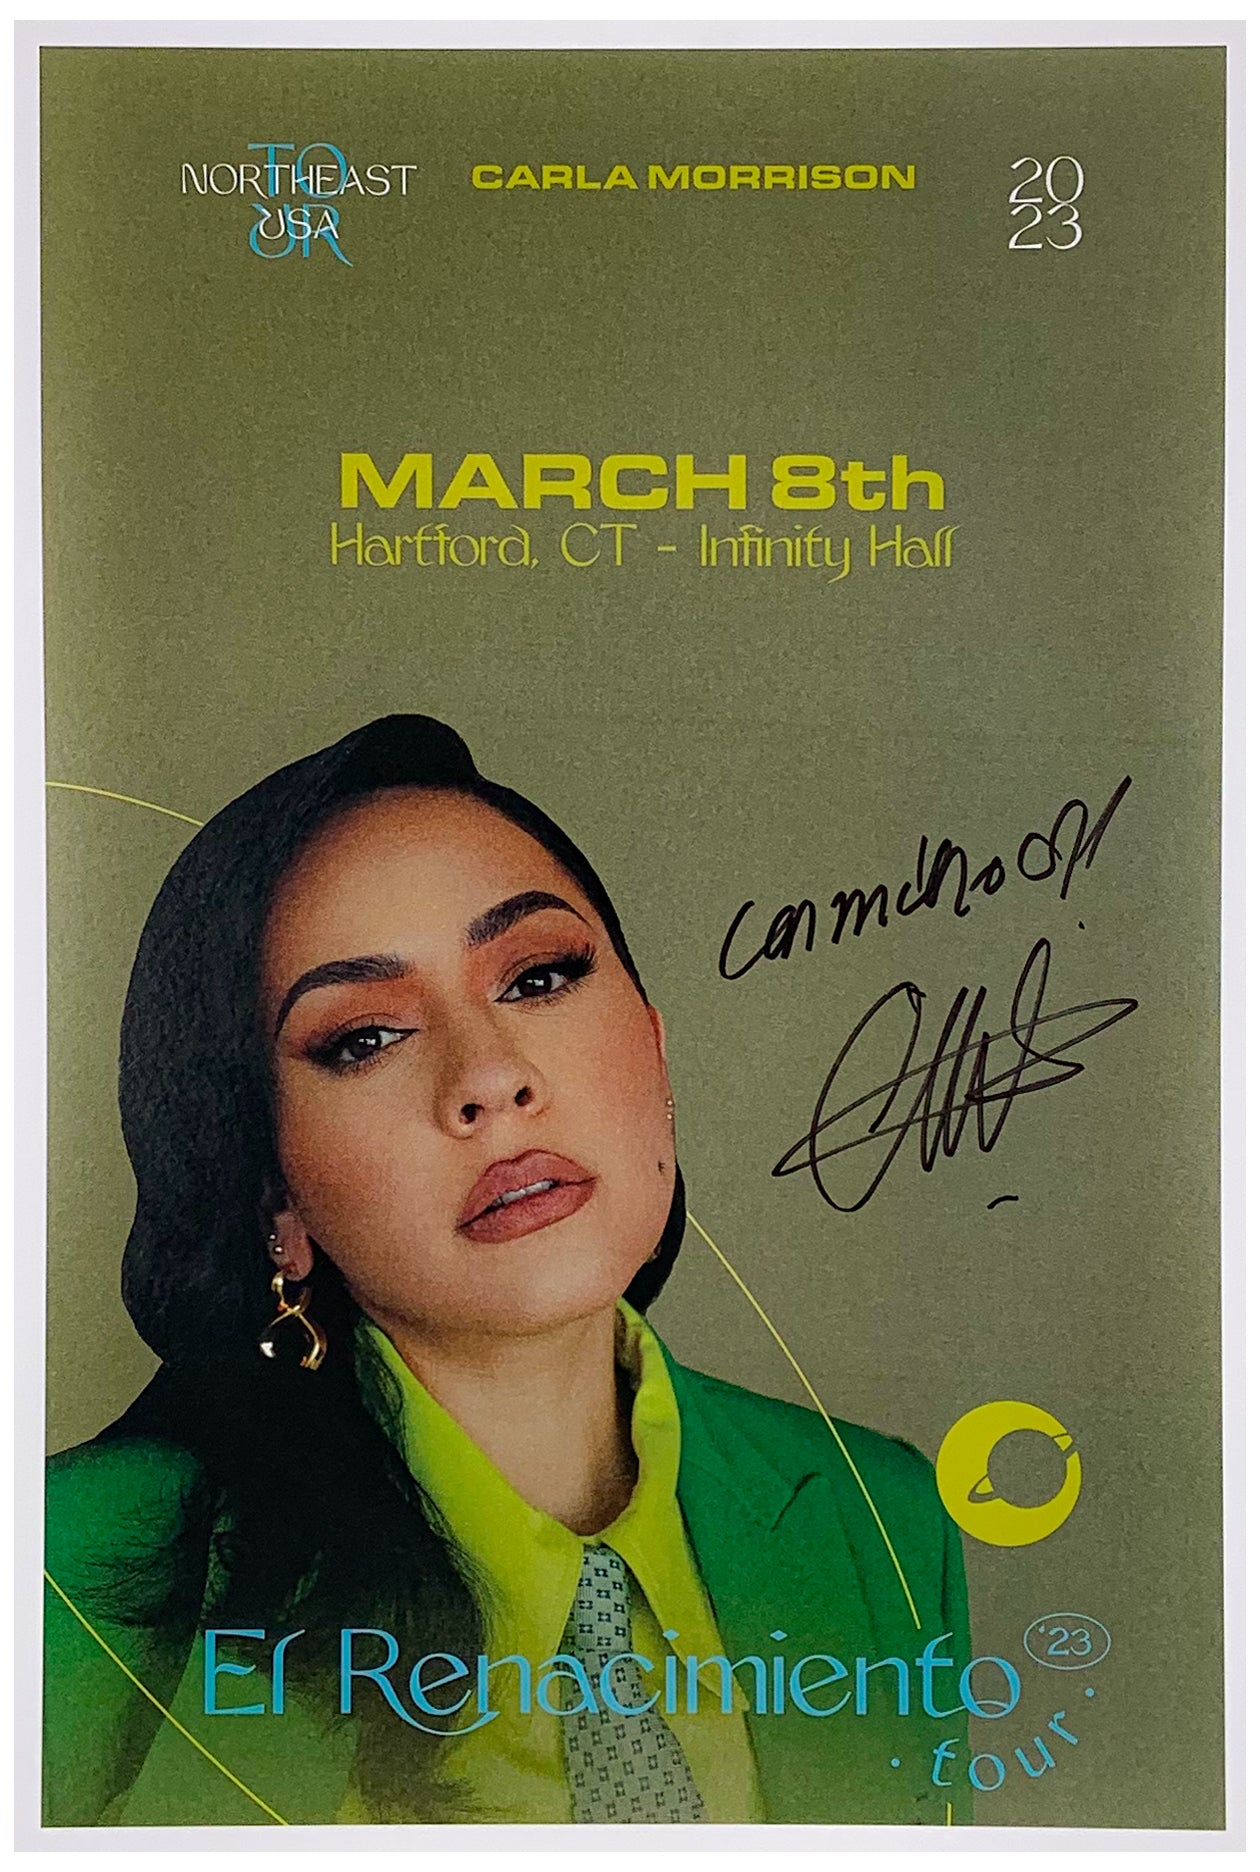 Carla Morrison Autograph Poster from Infinity Hall in Hartford CT